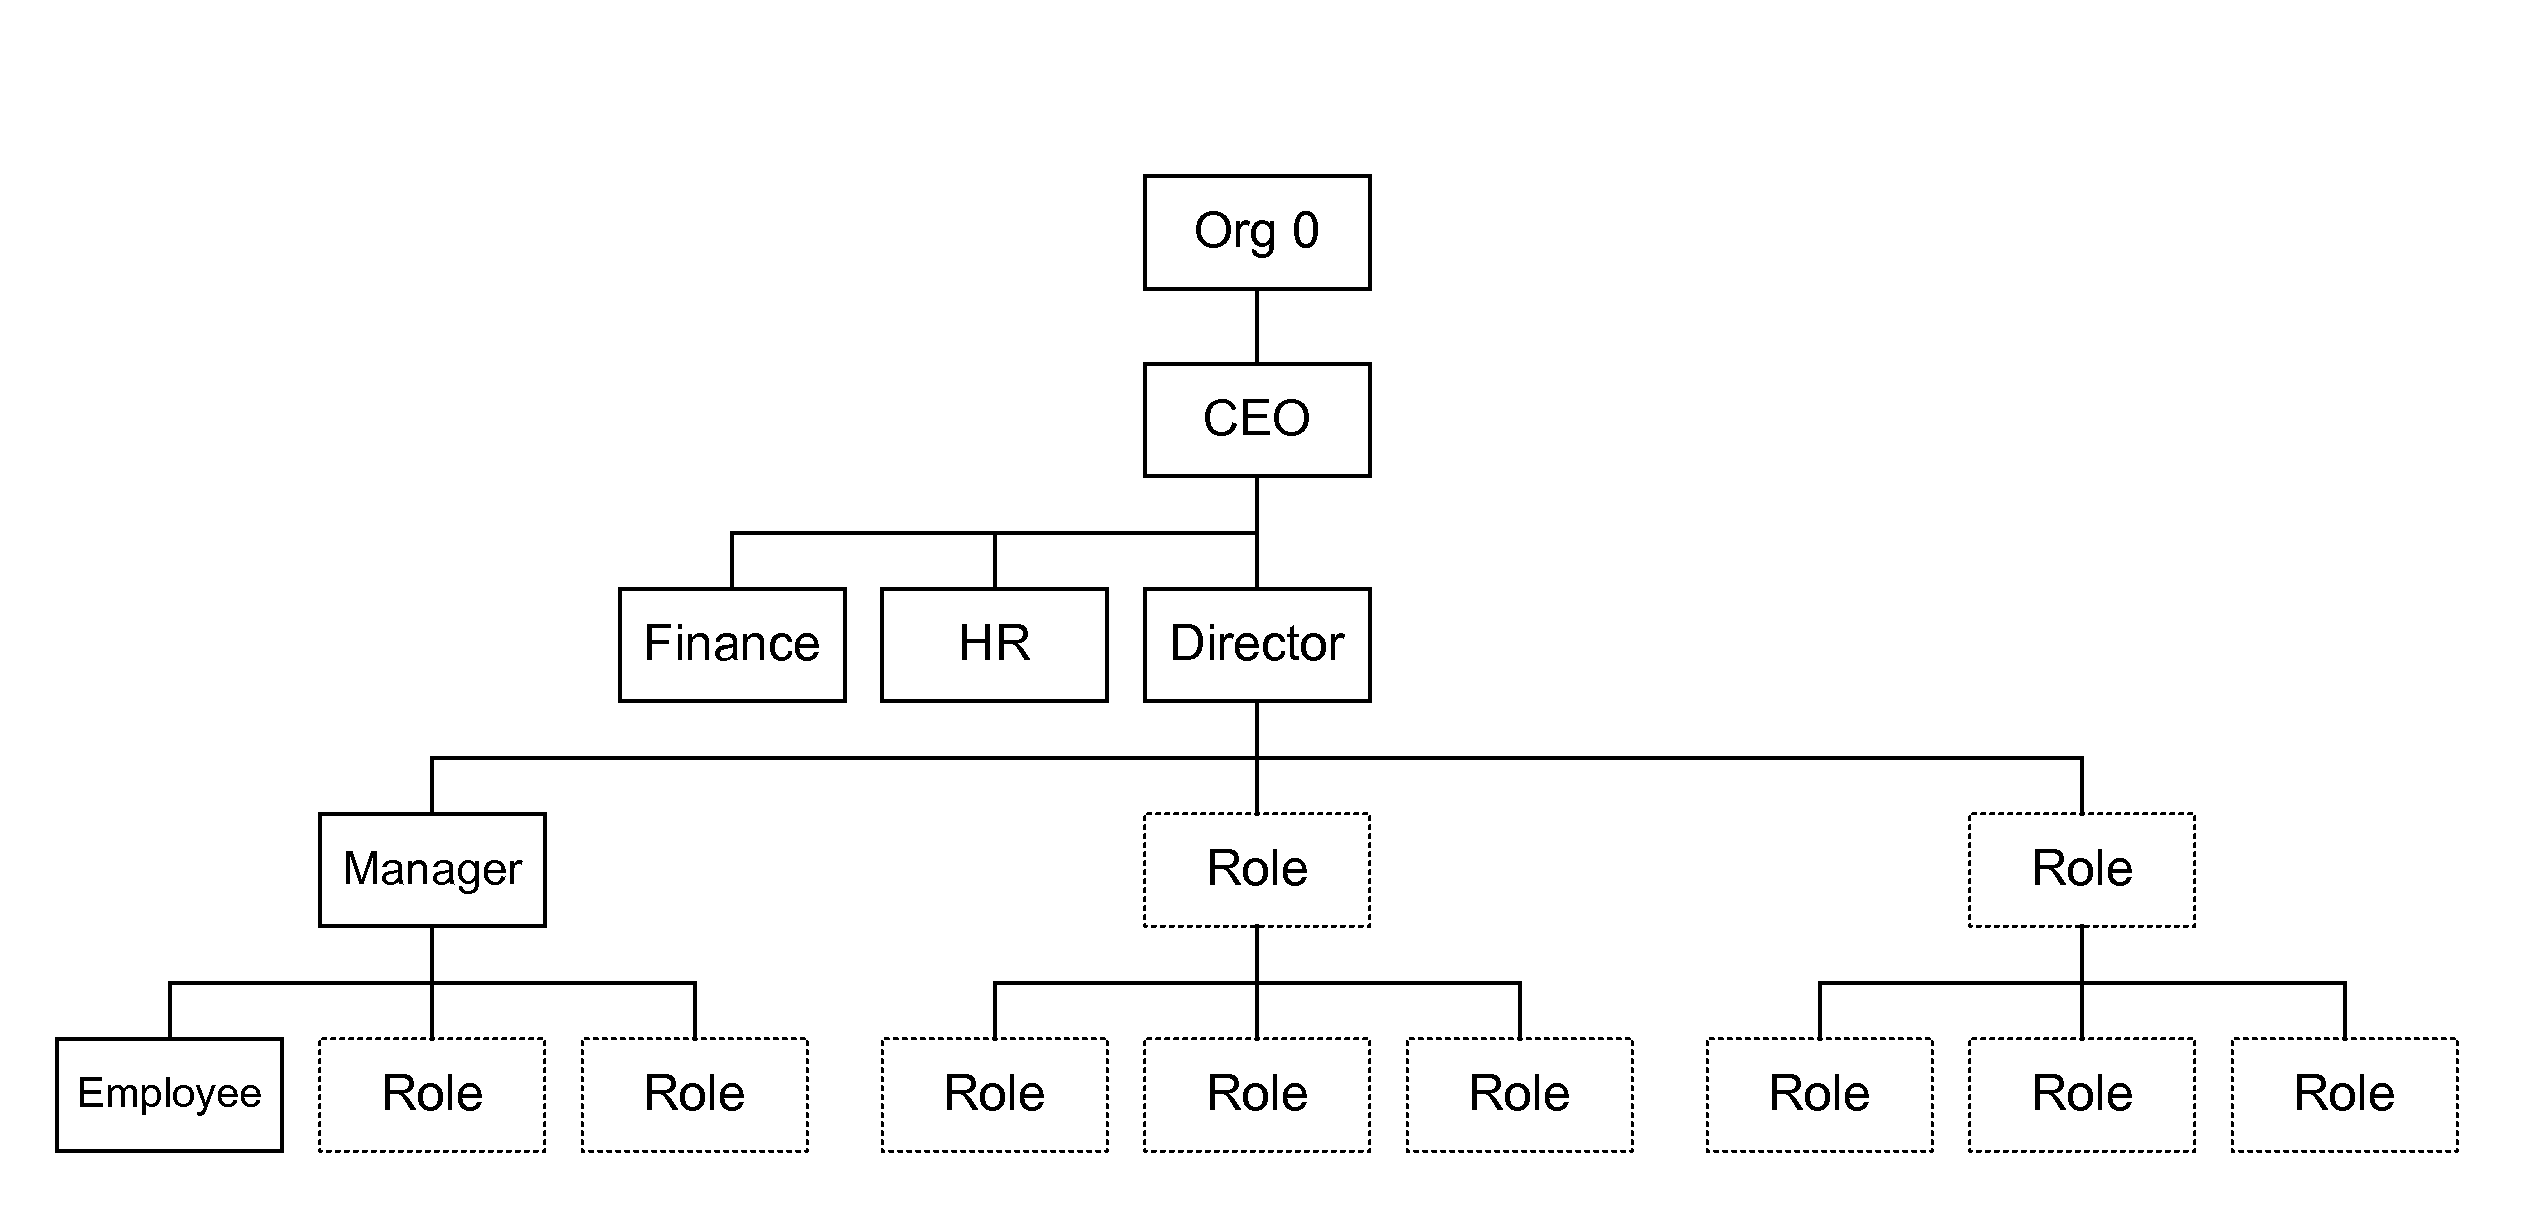 Approver Identification Using Multiple Hierarchical Role Structures